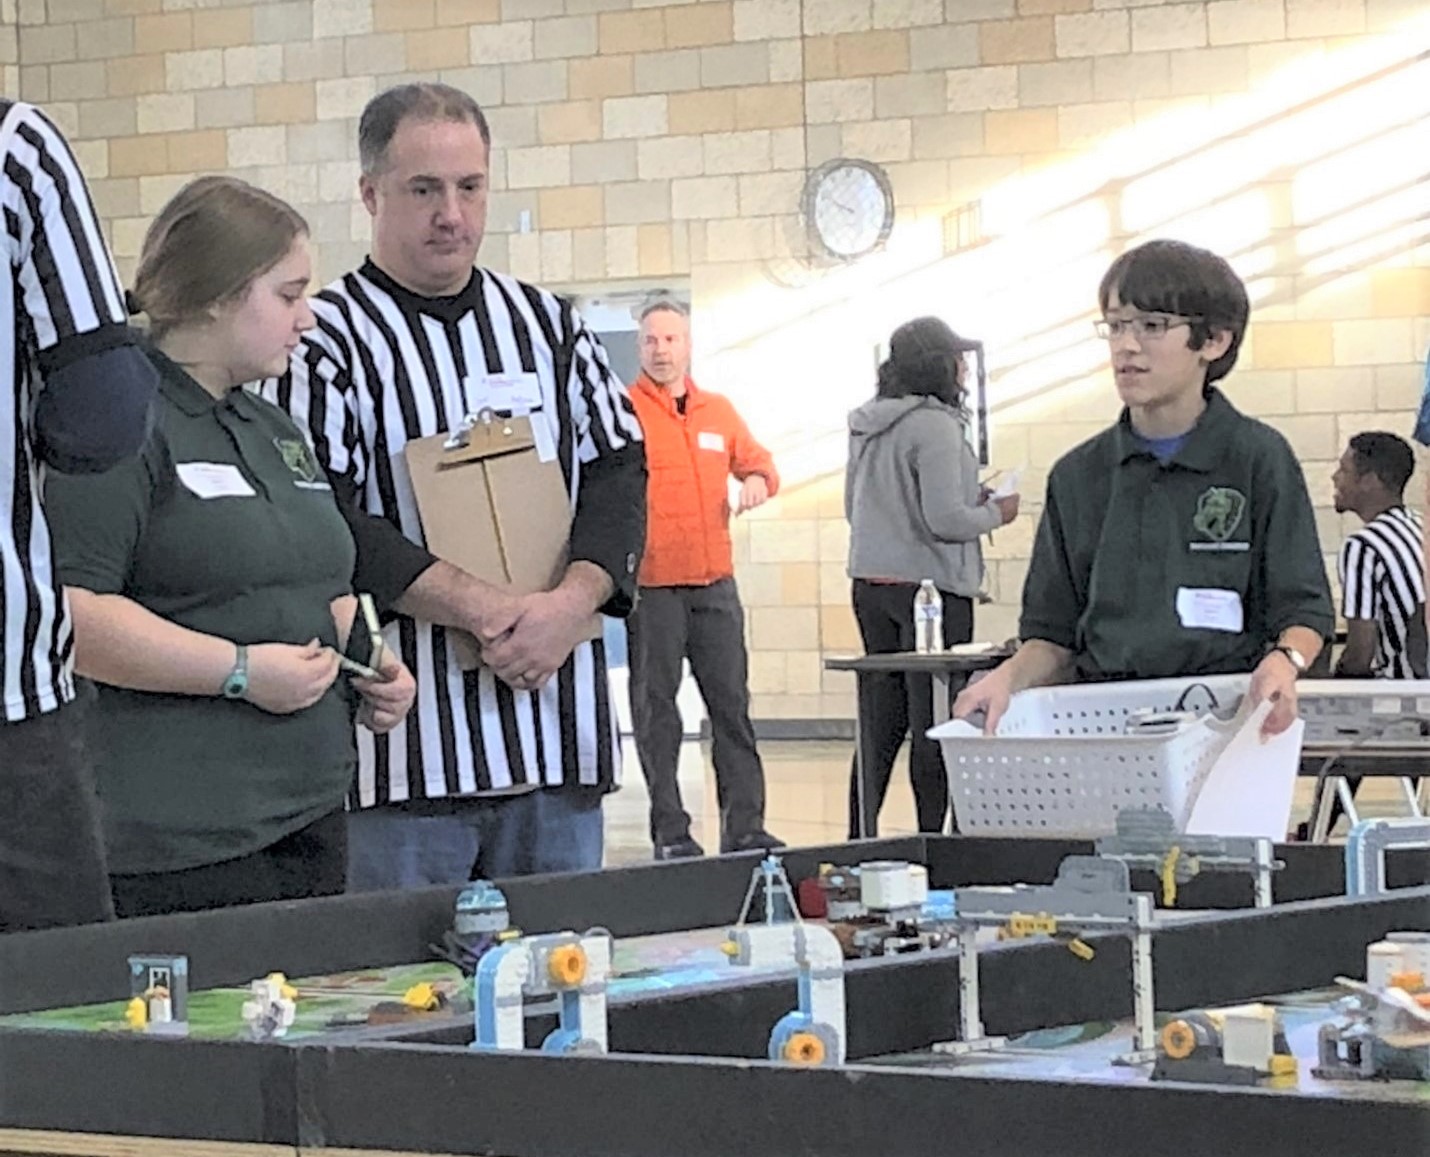 Parkrose youth from the SUN afterschool MESA Club explain their Robotics design to a referee at a citywide competition.